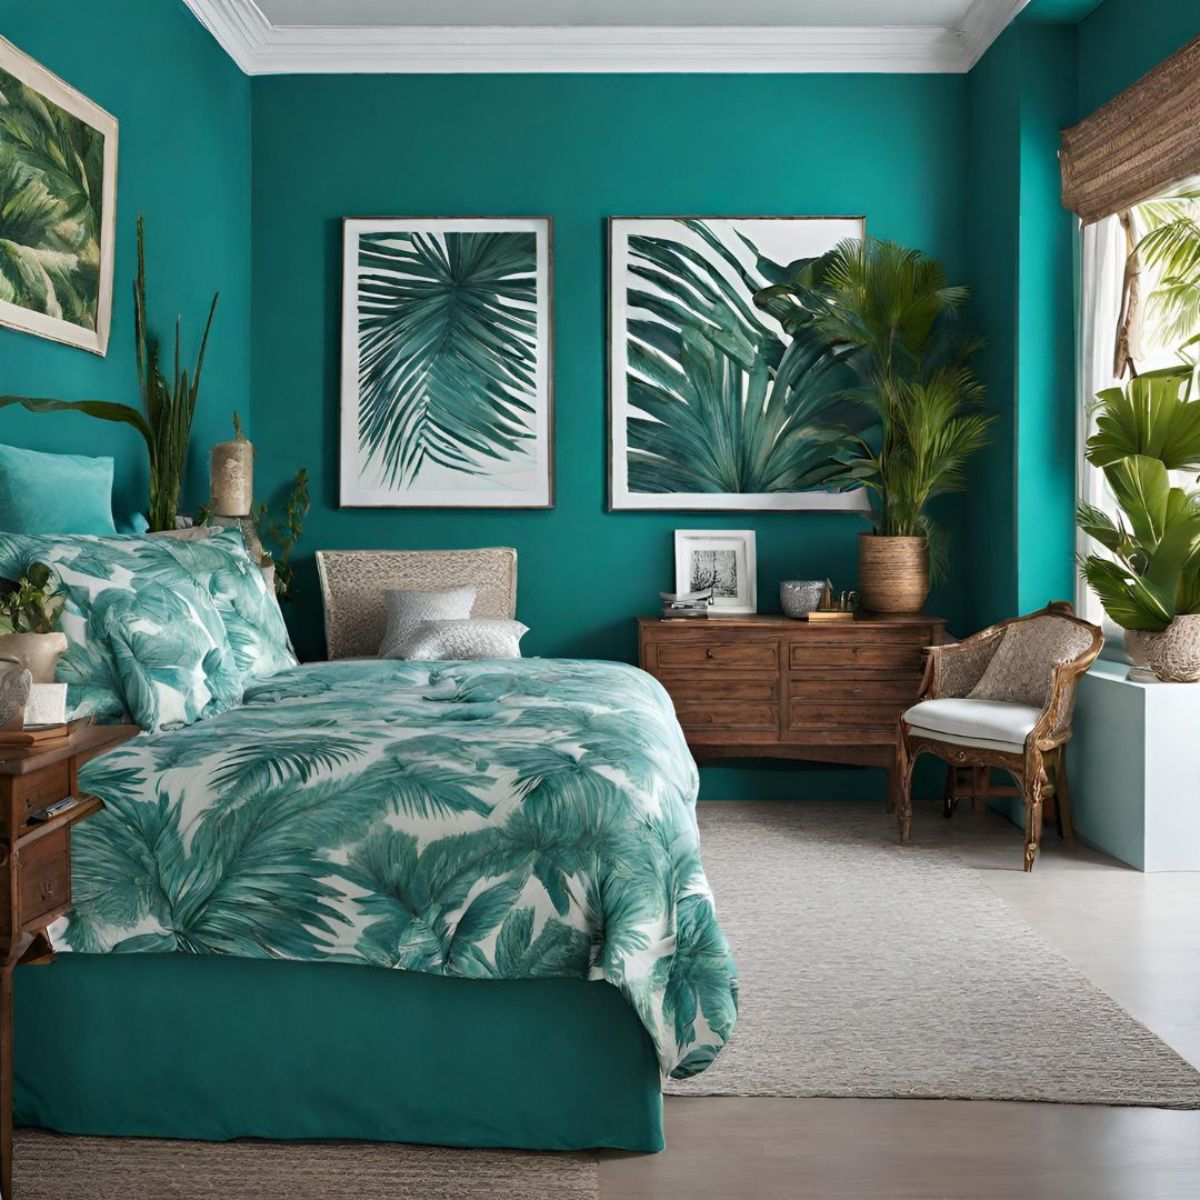 a teal bedroom with a palm-printed blanket and framed photos